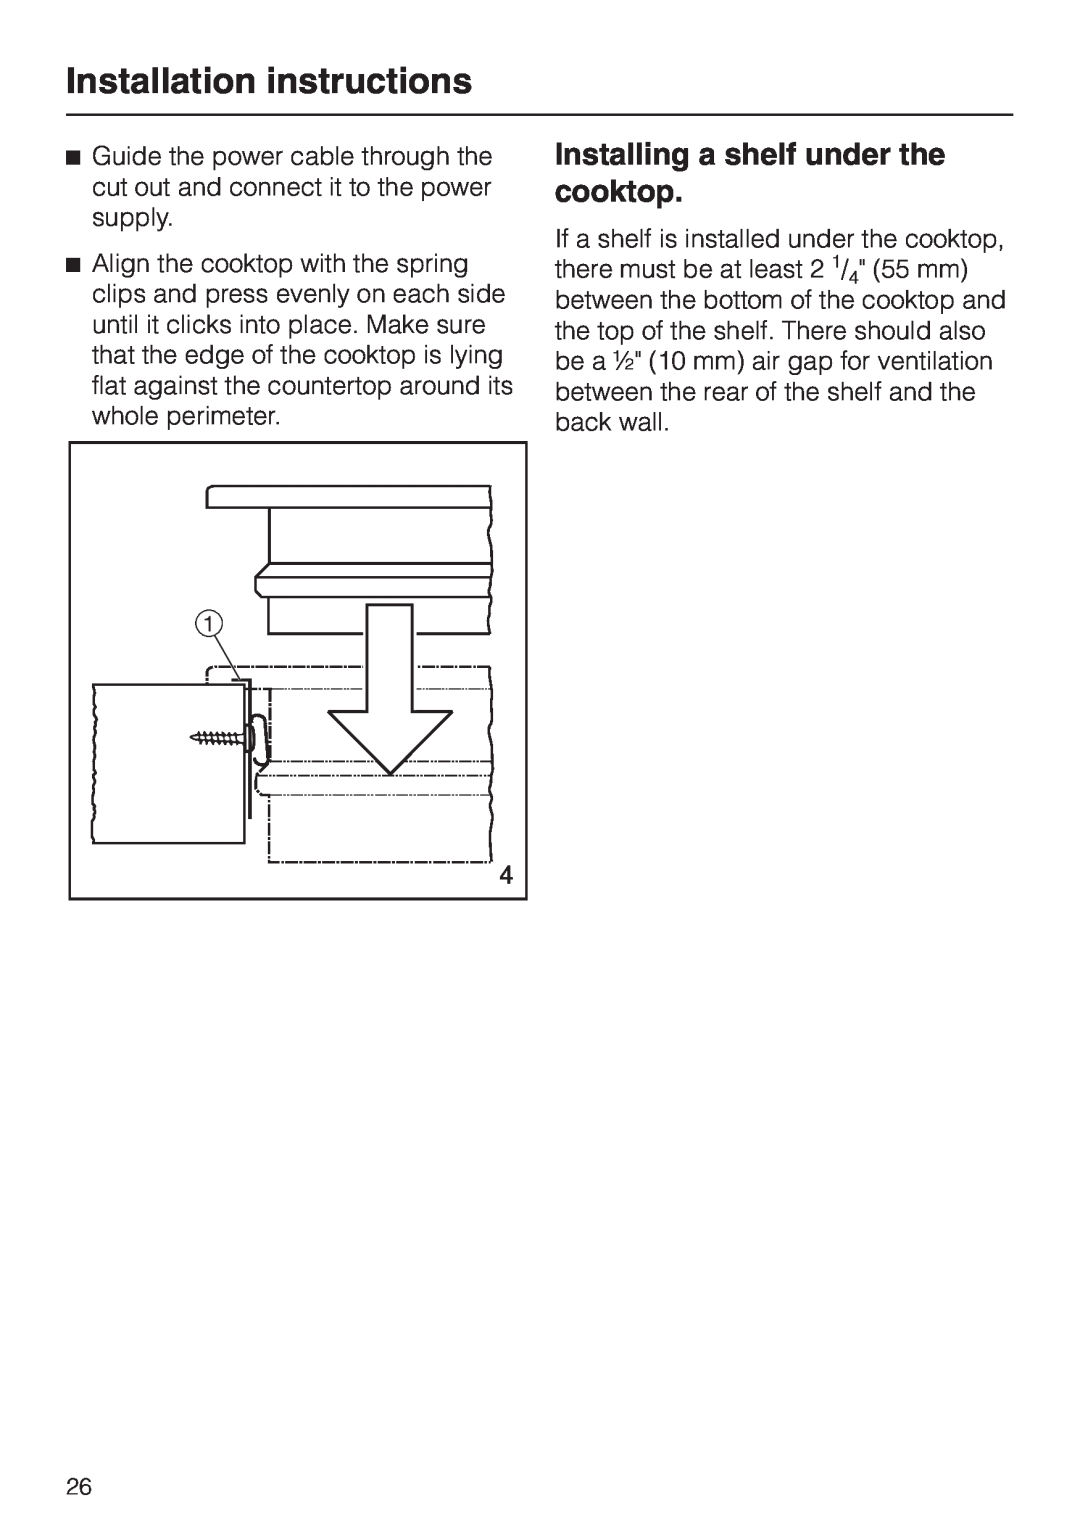 Miele KM 443 operating instructions Installation instructions, Installing a shelf under the cooktop 